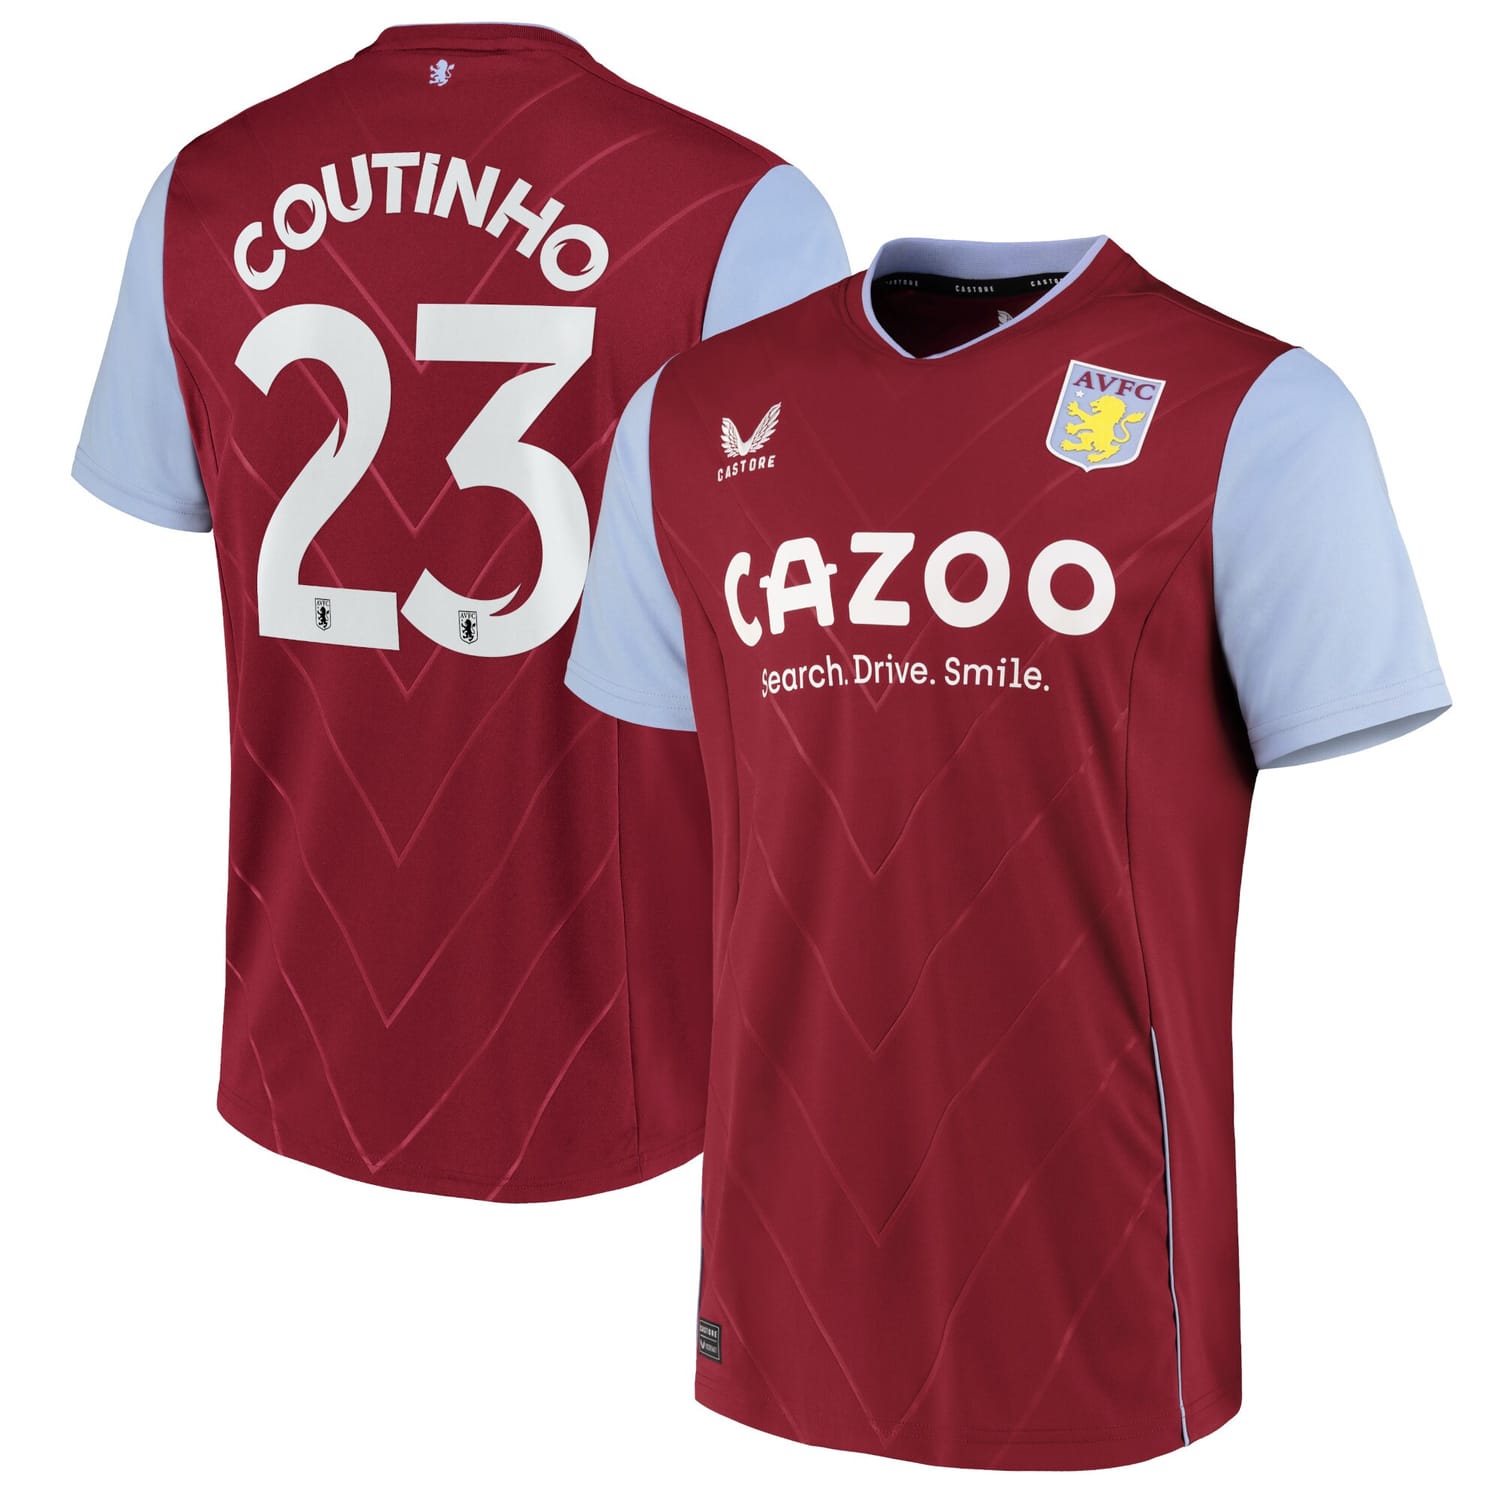 Premier League Aston Villa Home Cup Jersey Shirt 2022-23 player Philippe Coutinho 23 printing for Men